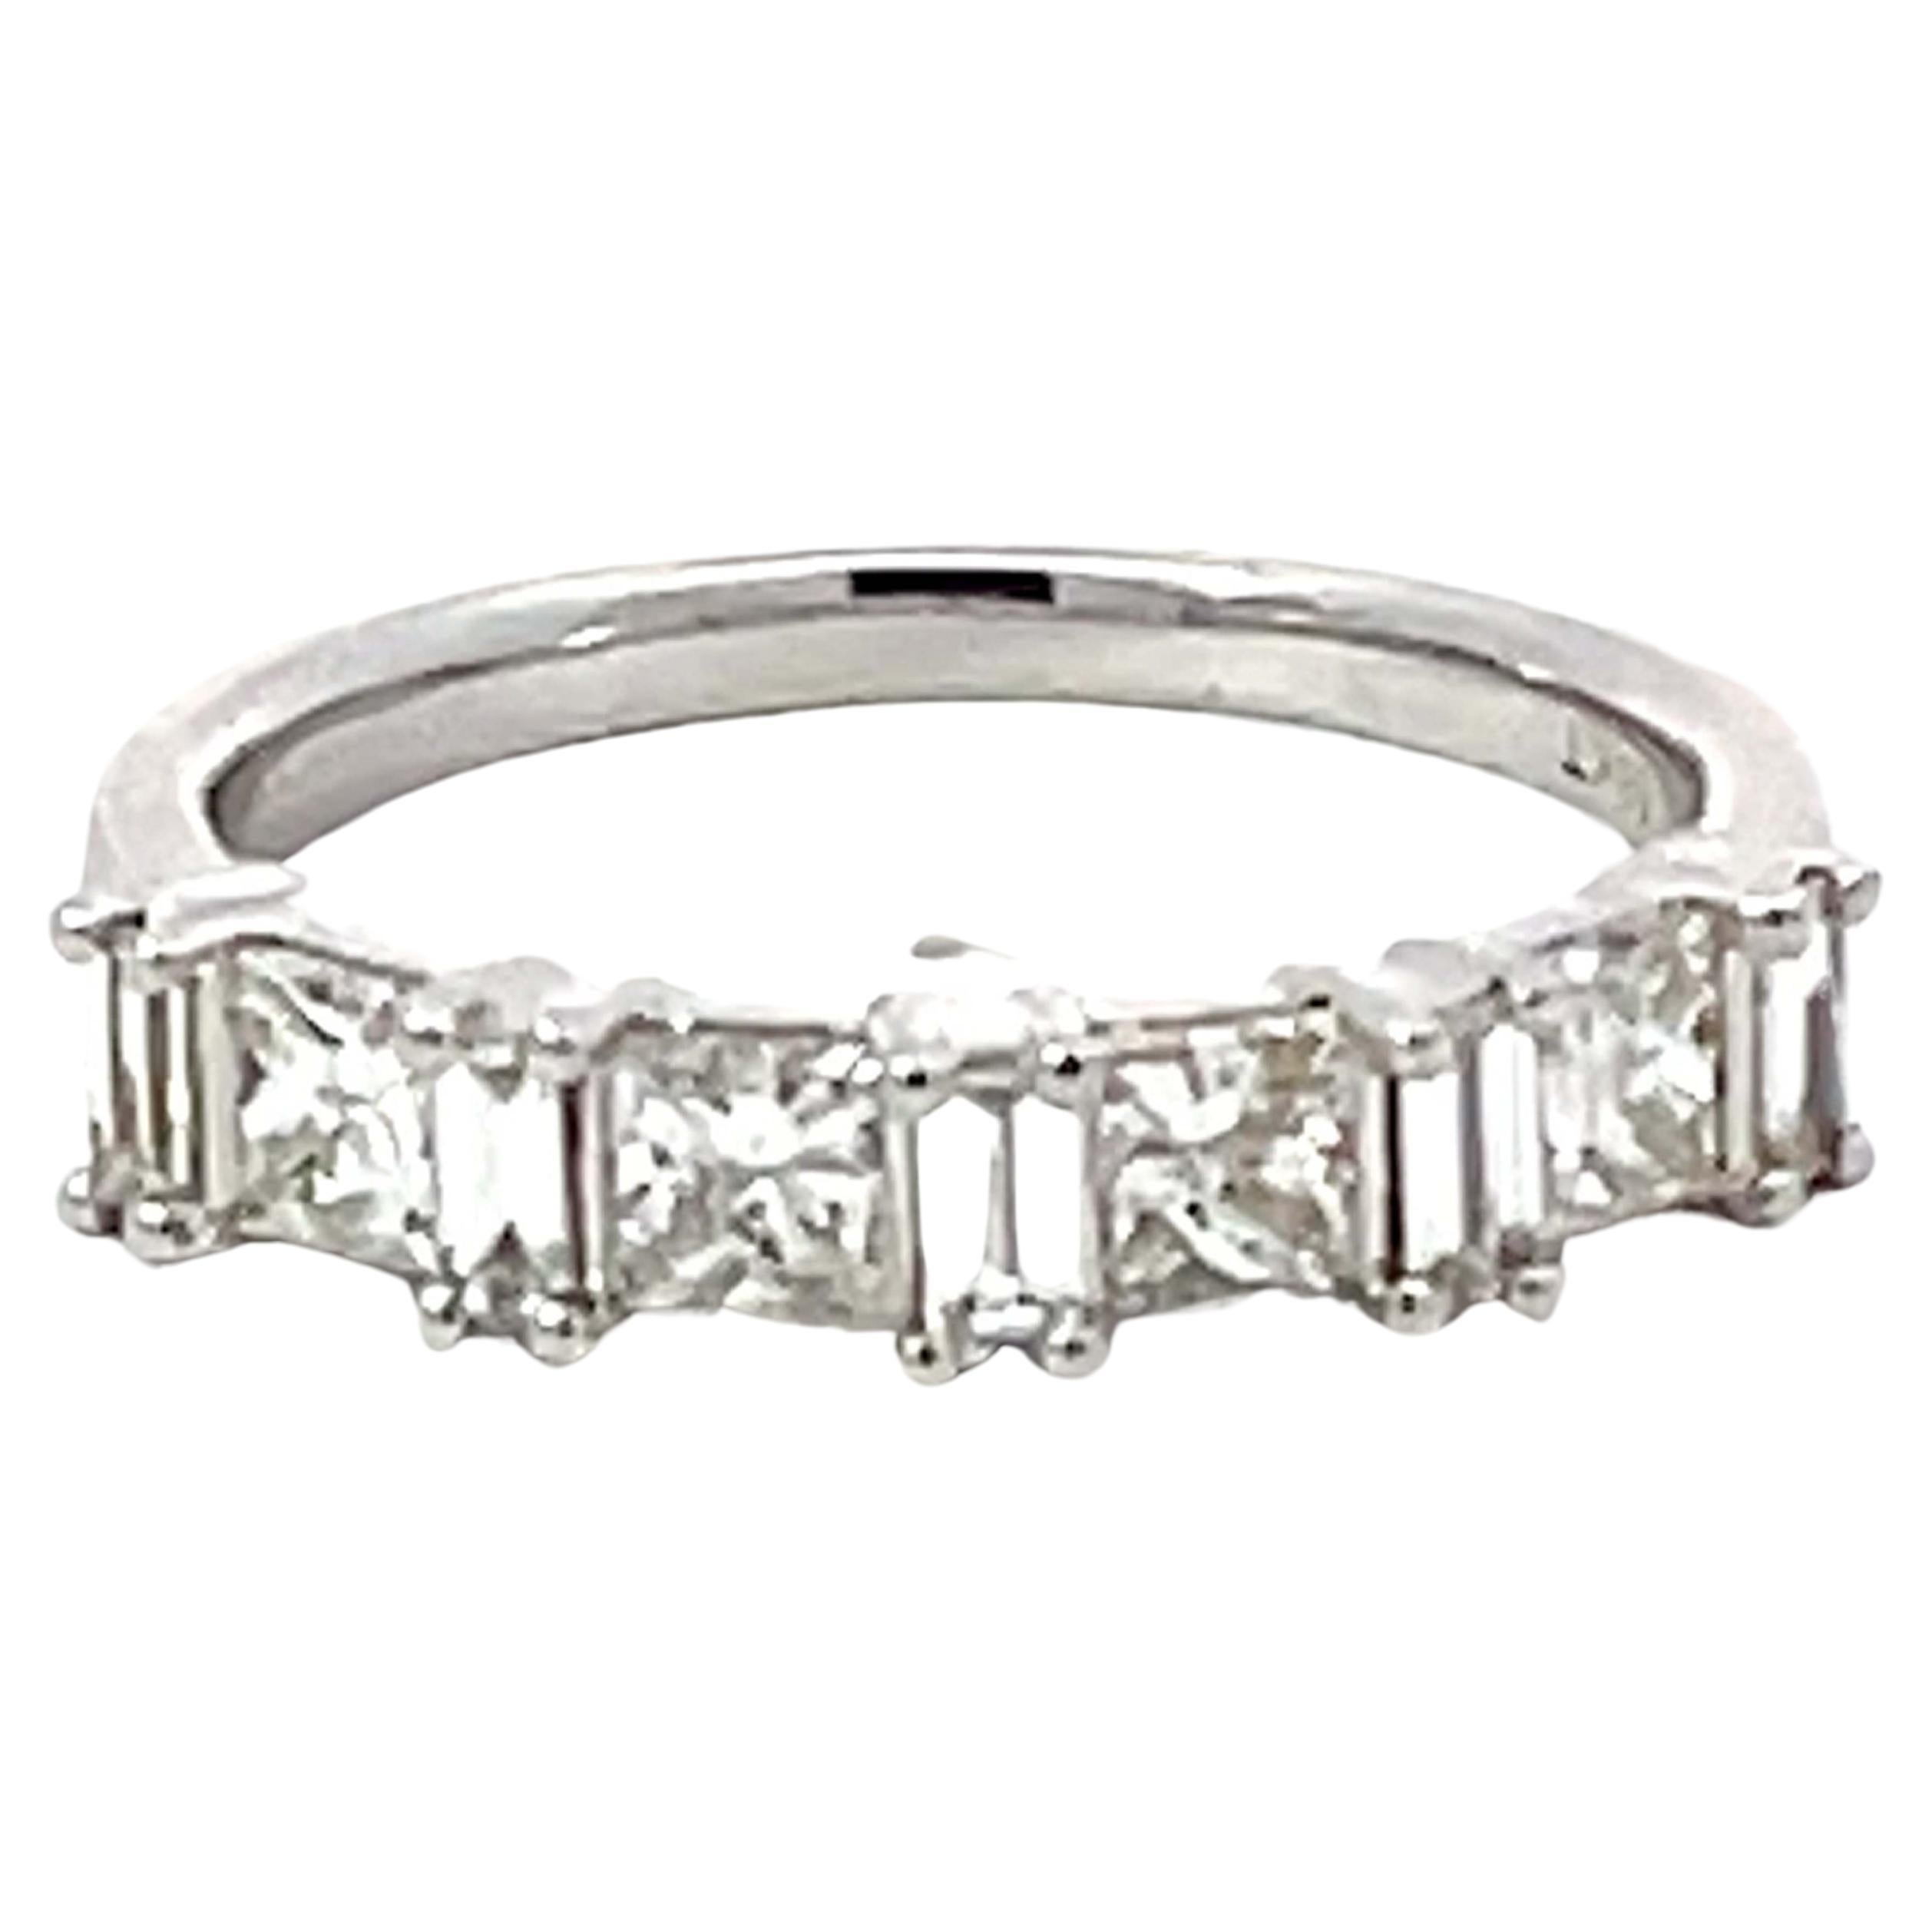 Princess Cut and Baguette Diamond Alternating Band Ring Solid 18k White Gold